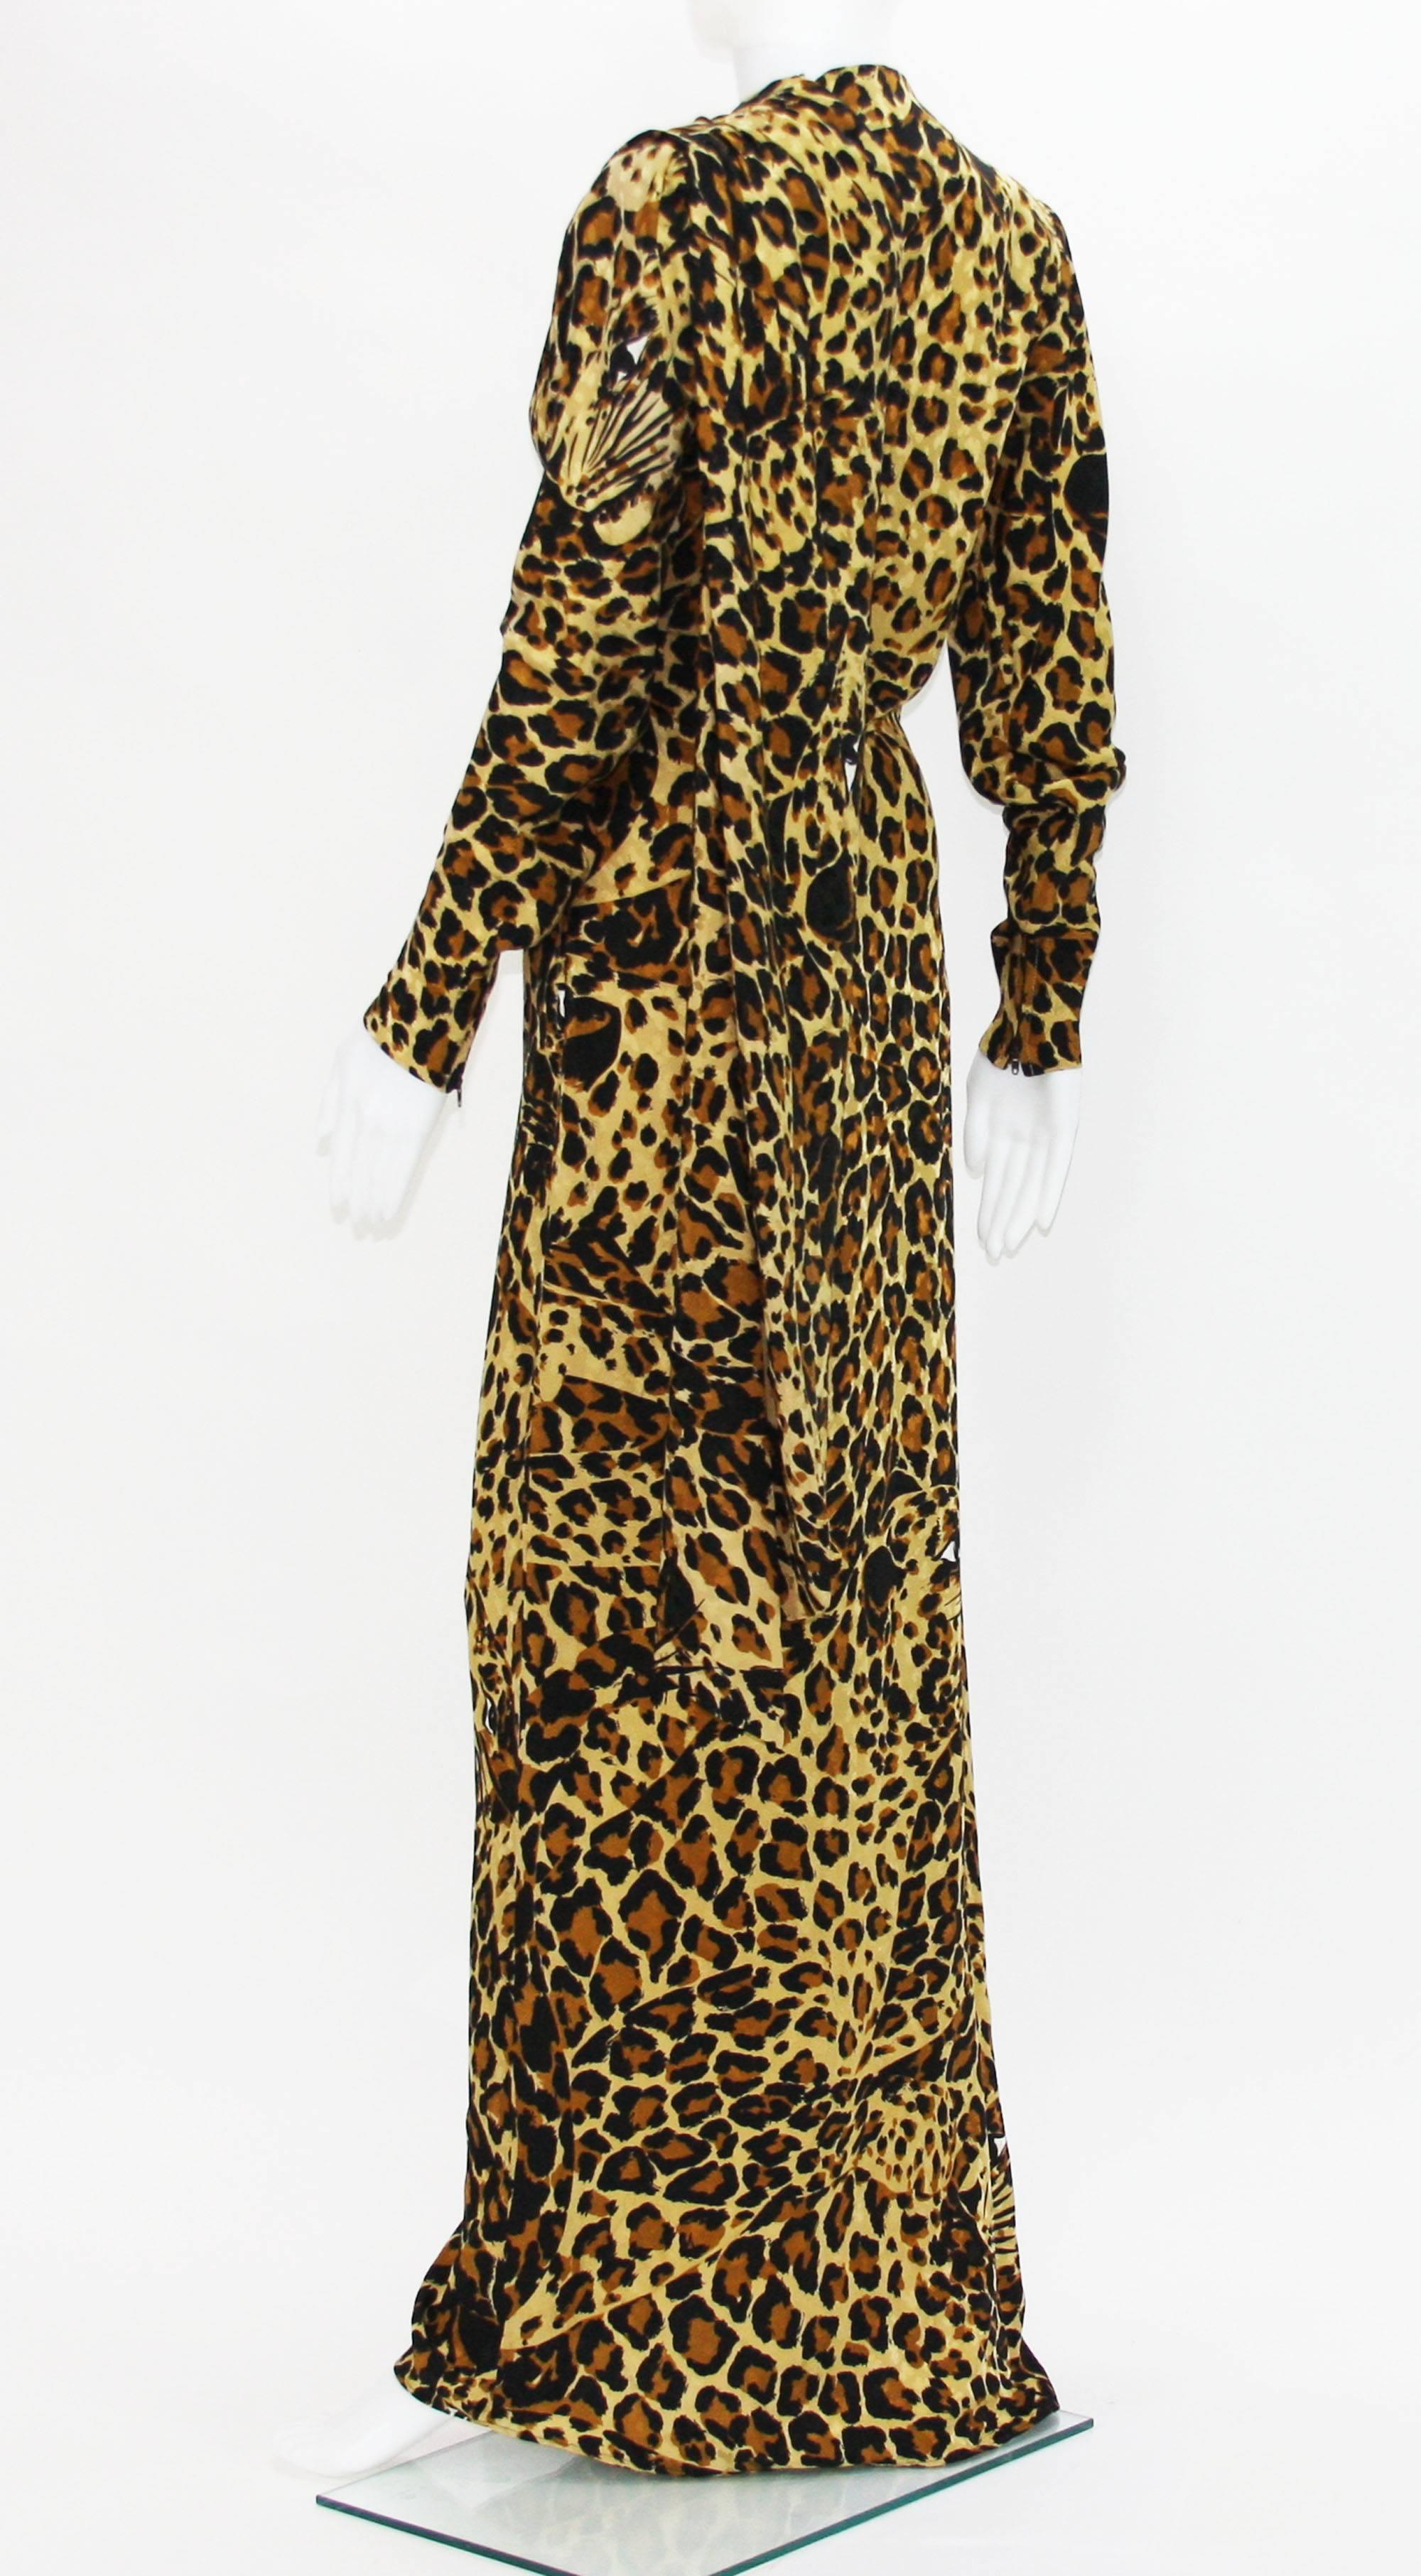 Women's Yves Saint Laurent Runway F/W 1982/83 Leopard Silk Gown with High Slit Scarf Fr. For Sale